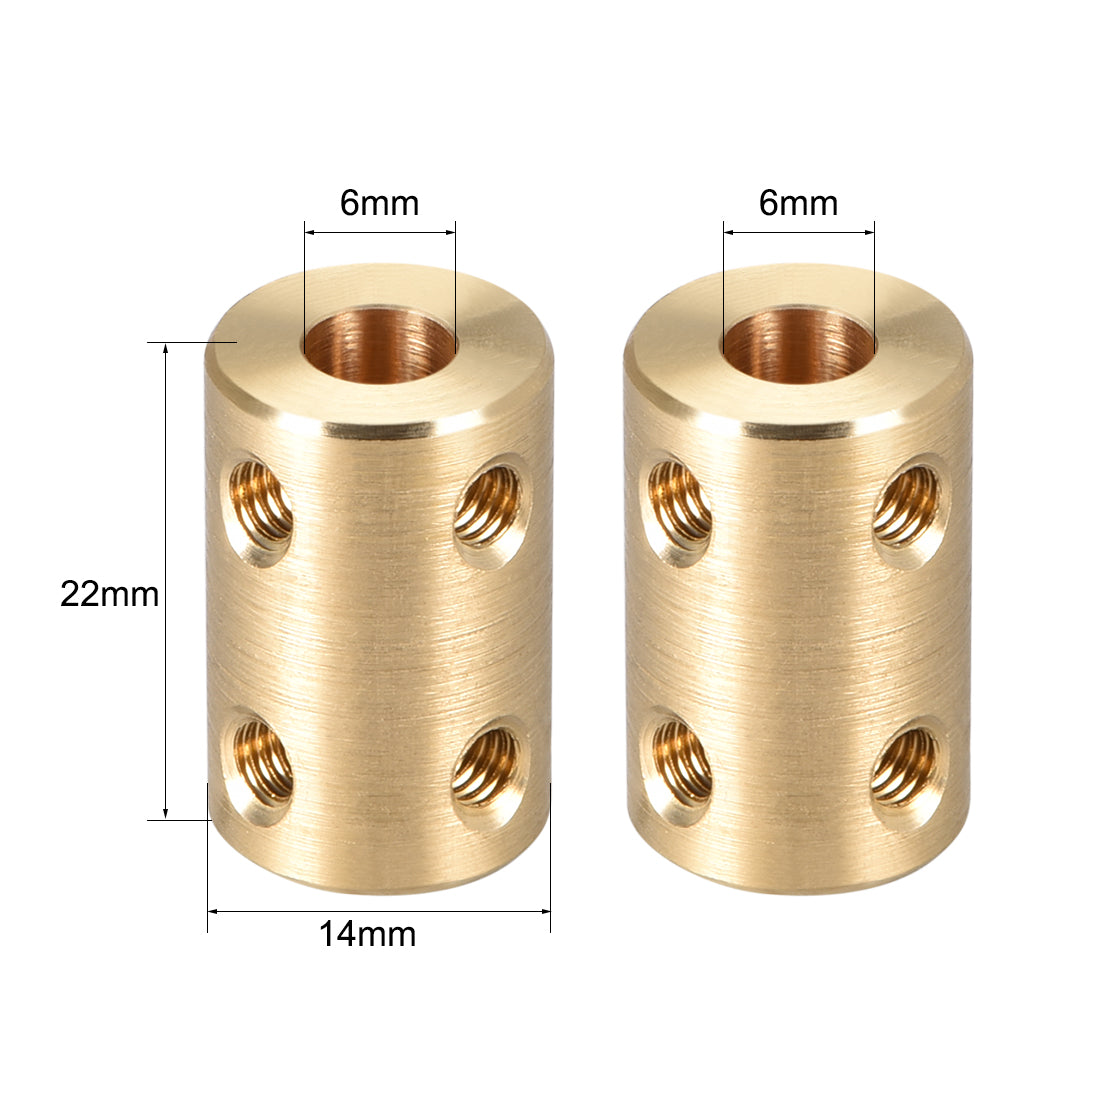 uxcell Uxcell Shaft Coupling 6mm to 6mm Bore L22xD14 Robot Motor Wheel Rigid Coupler Connector Gold Tone 2 Pcs